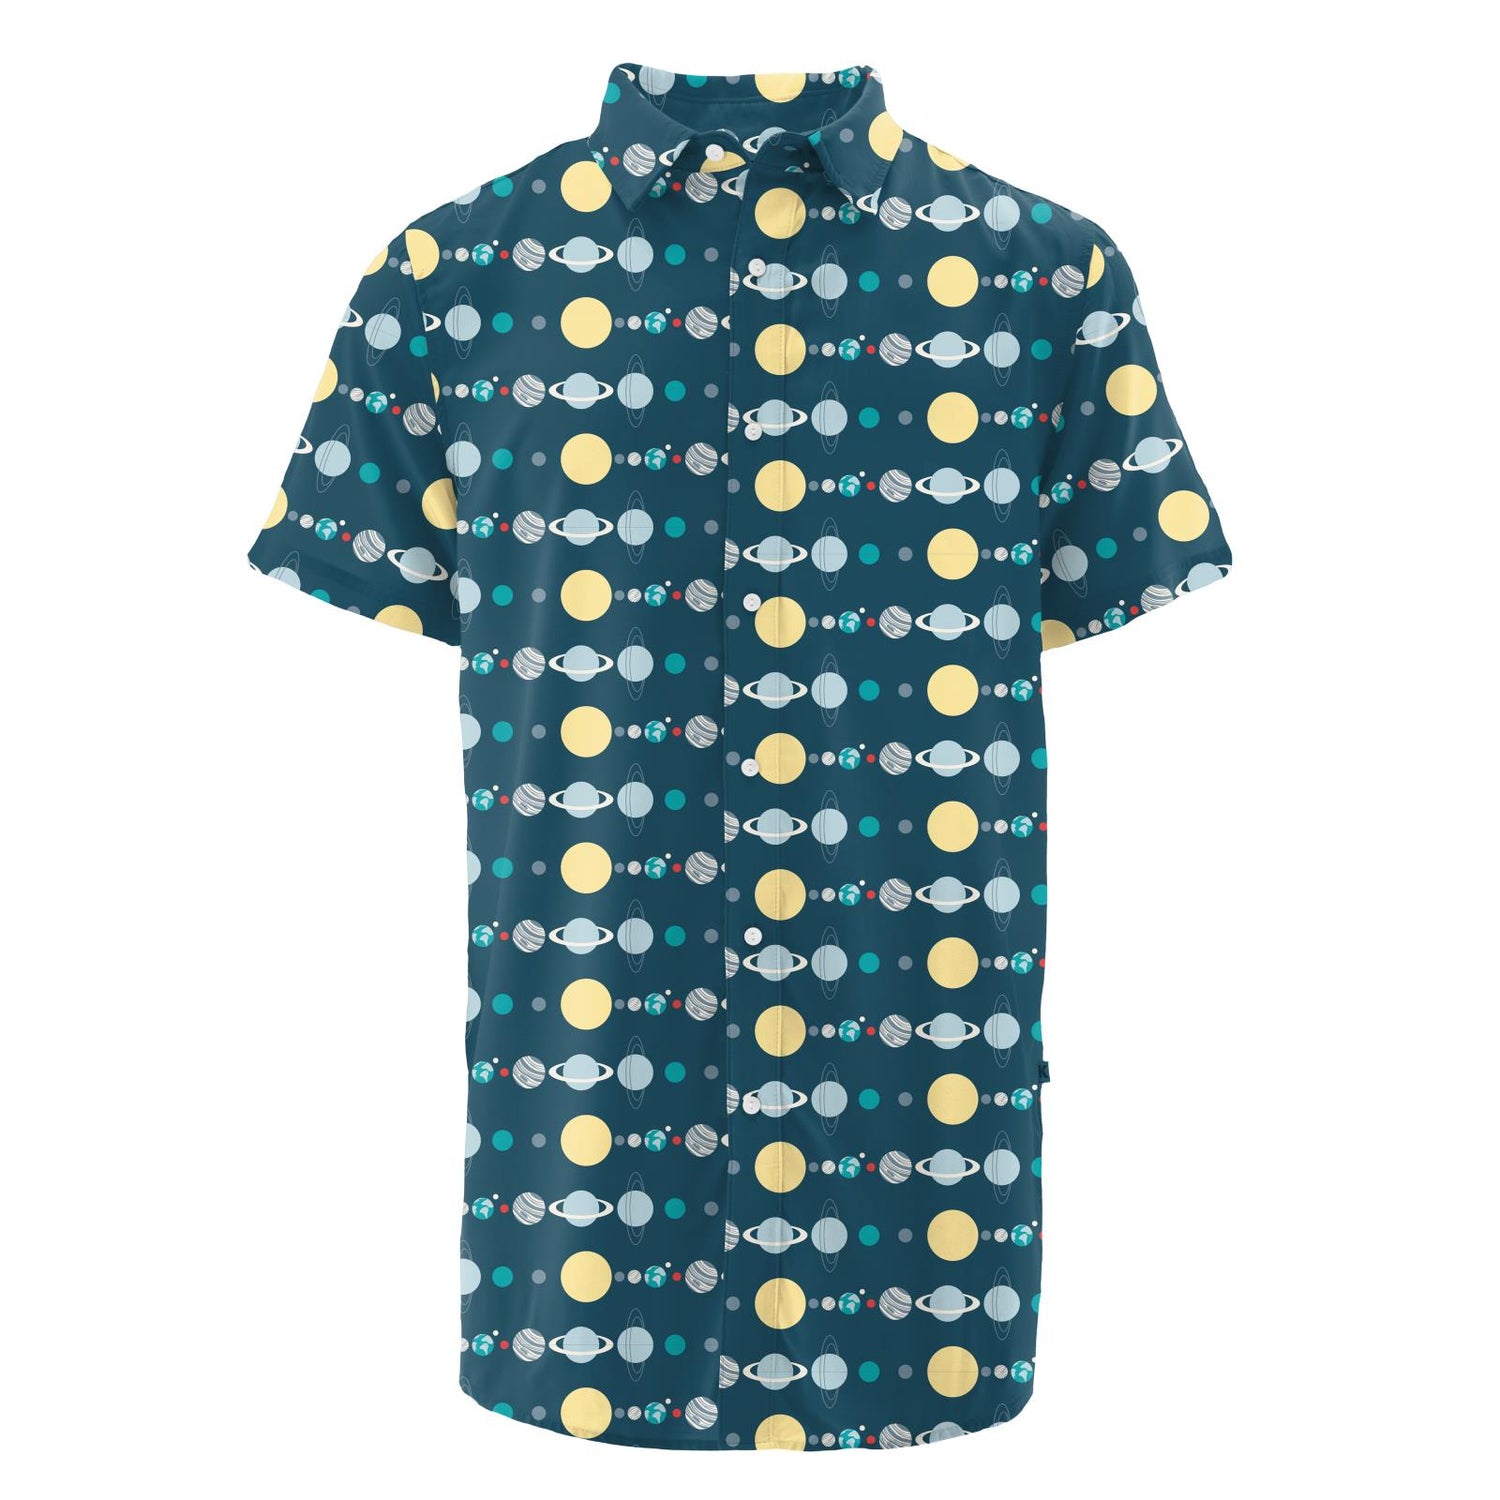 Men's Print Short Sleeve Woven Button Down Shirt in Peacock Planets